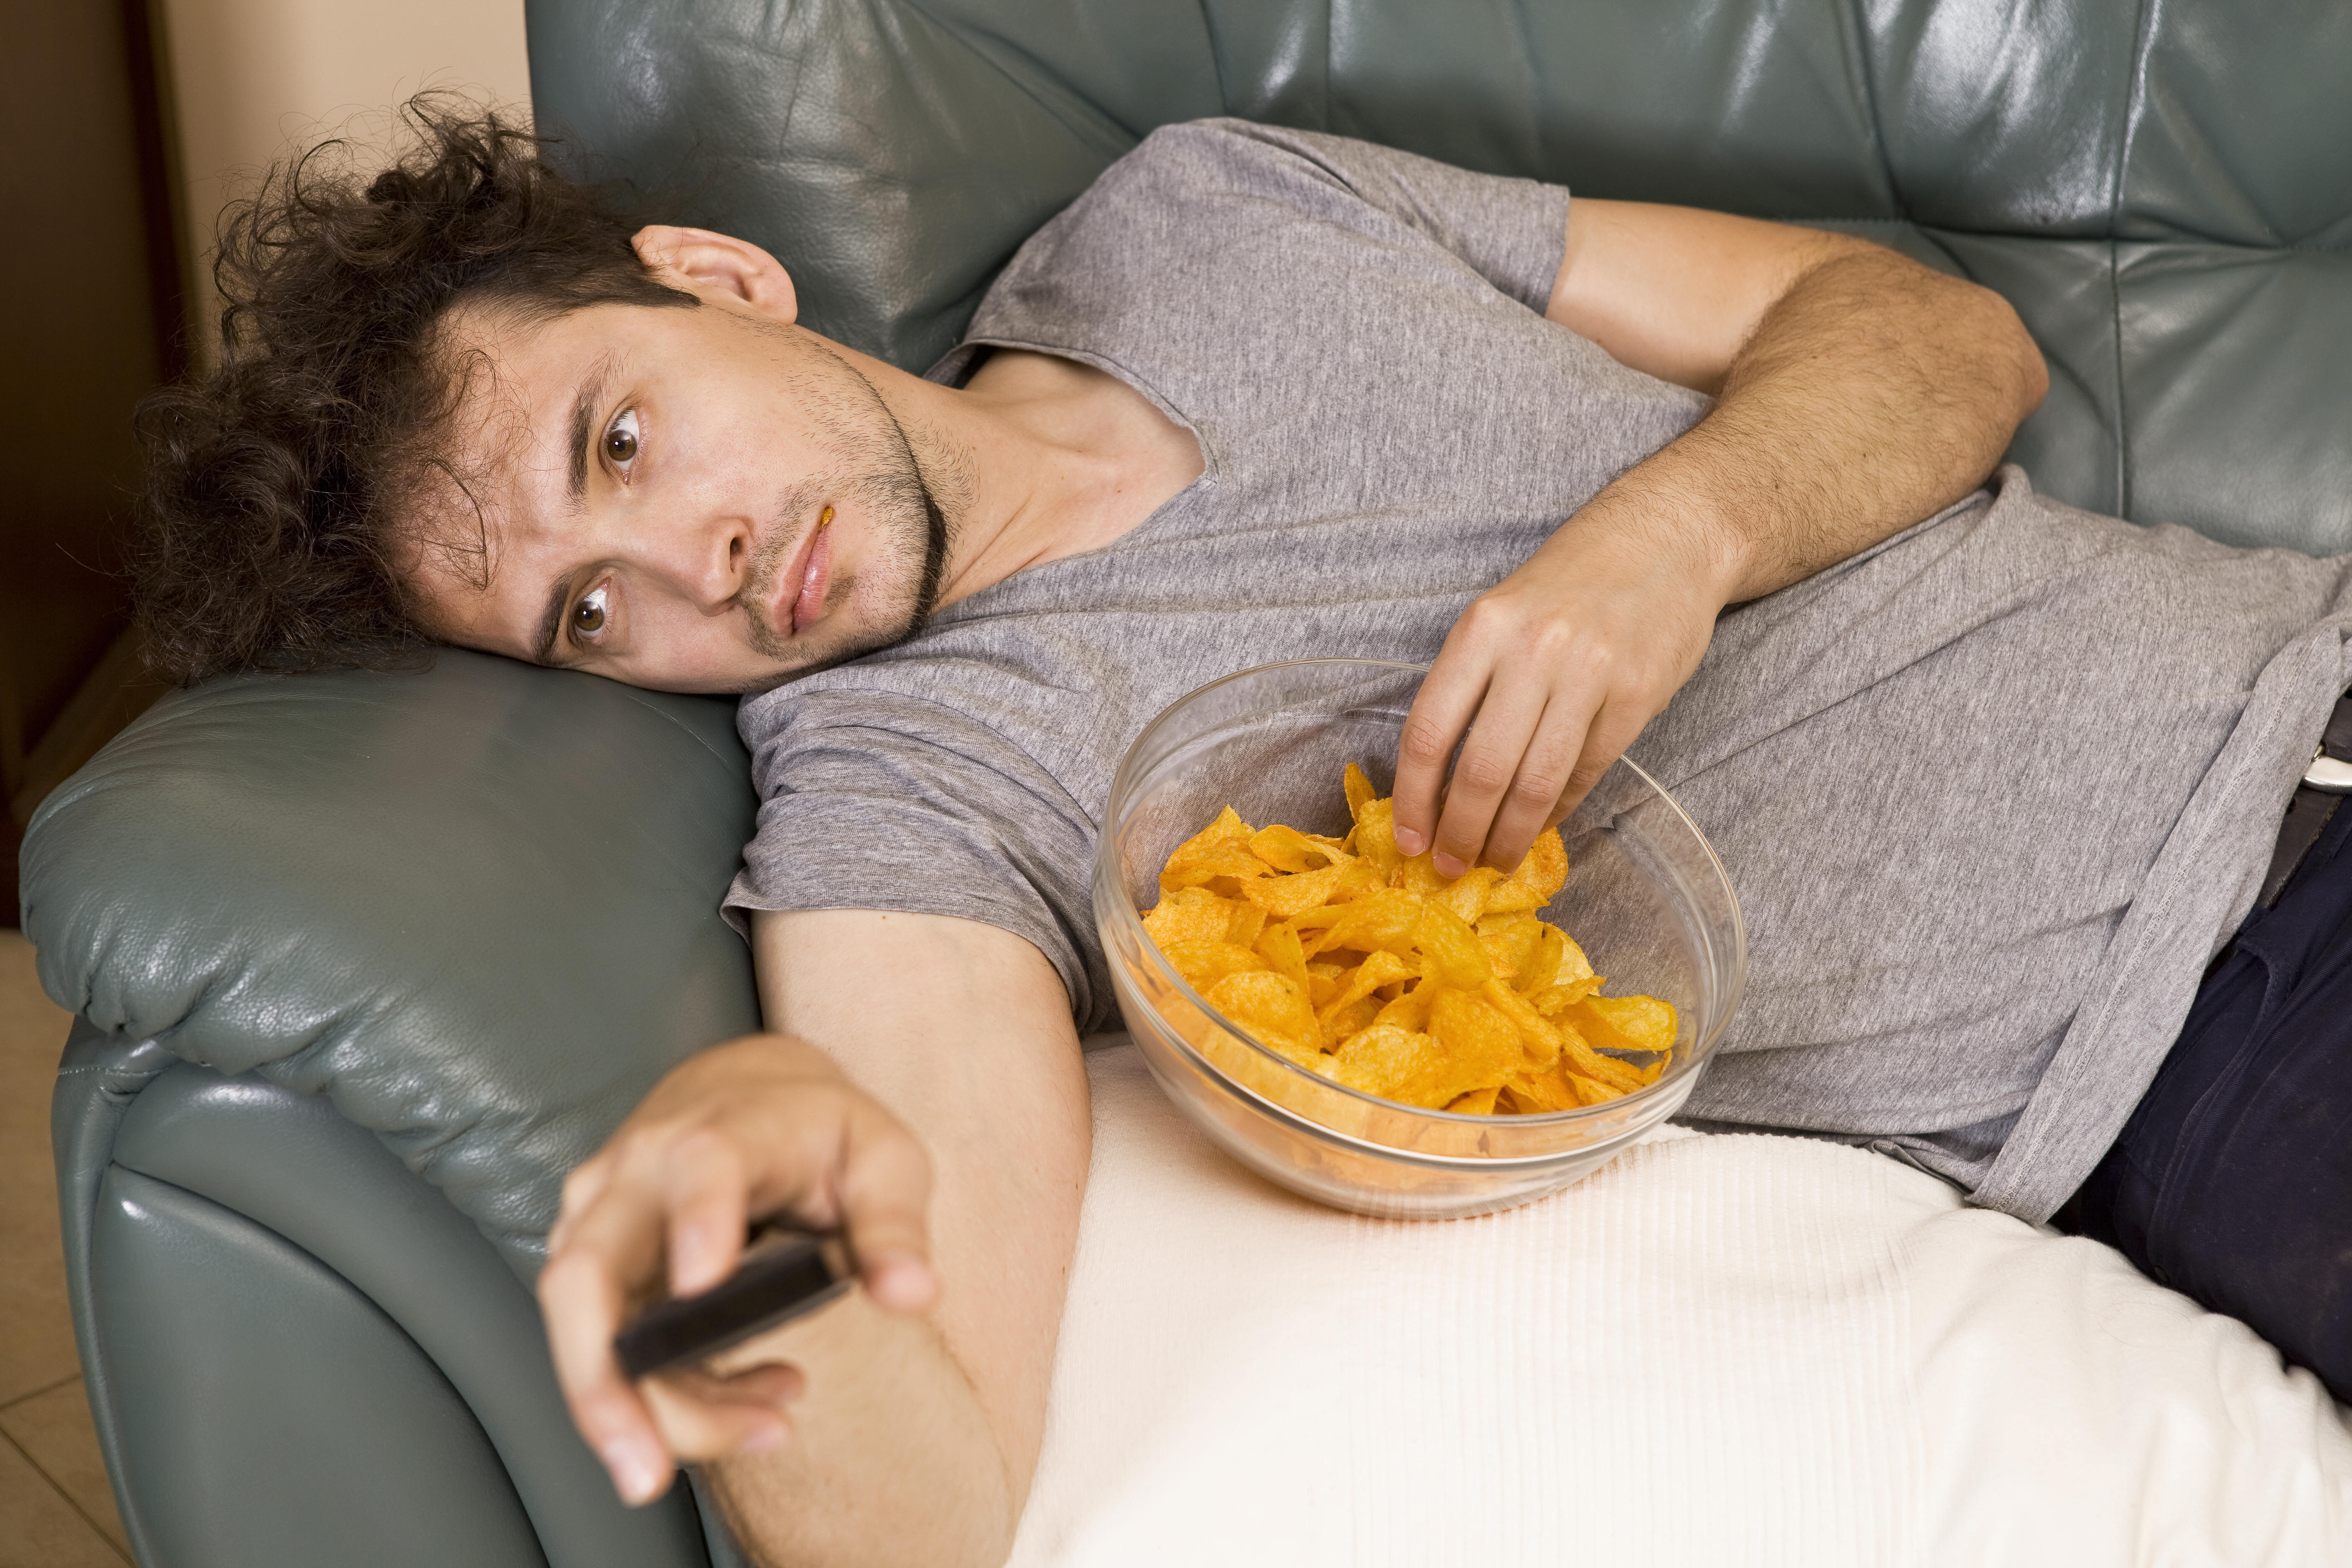 A lazy man laying on a couch watching television while eating snacks | Source: Getty Images